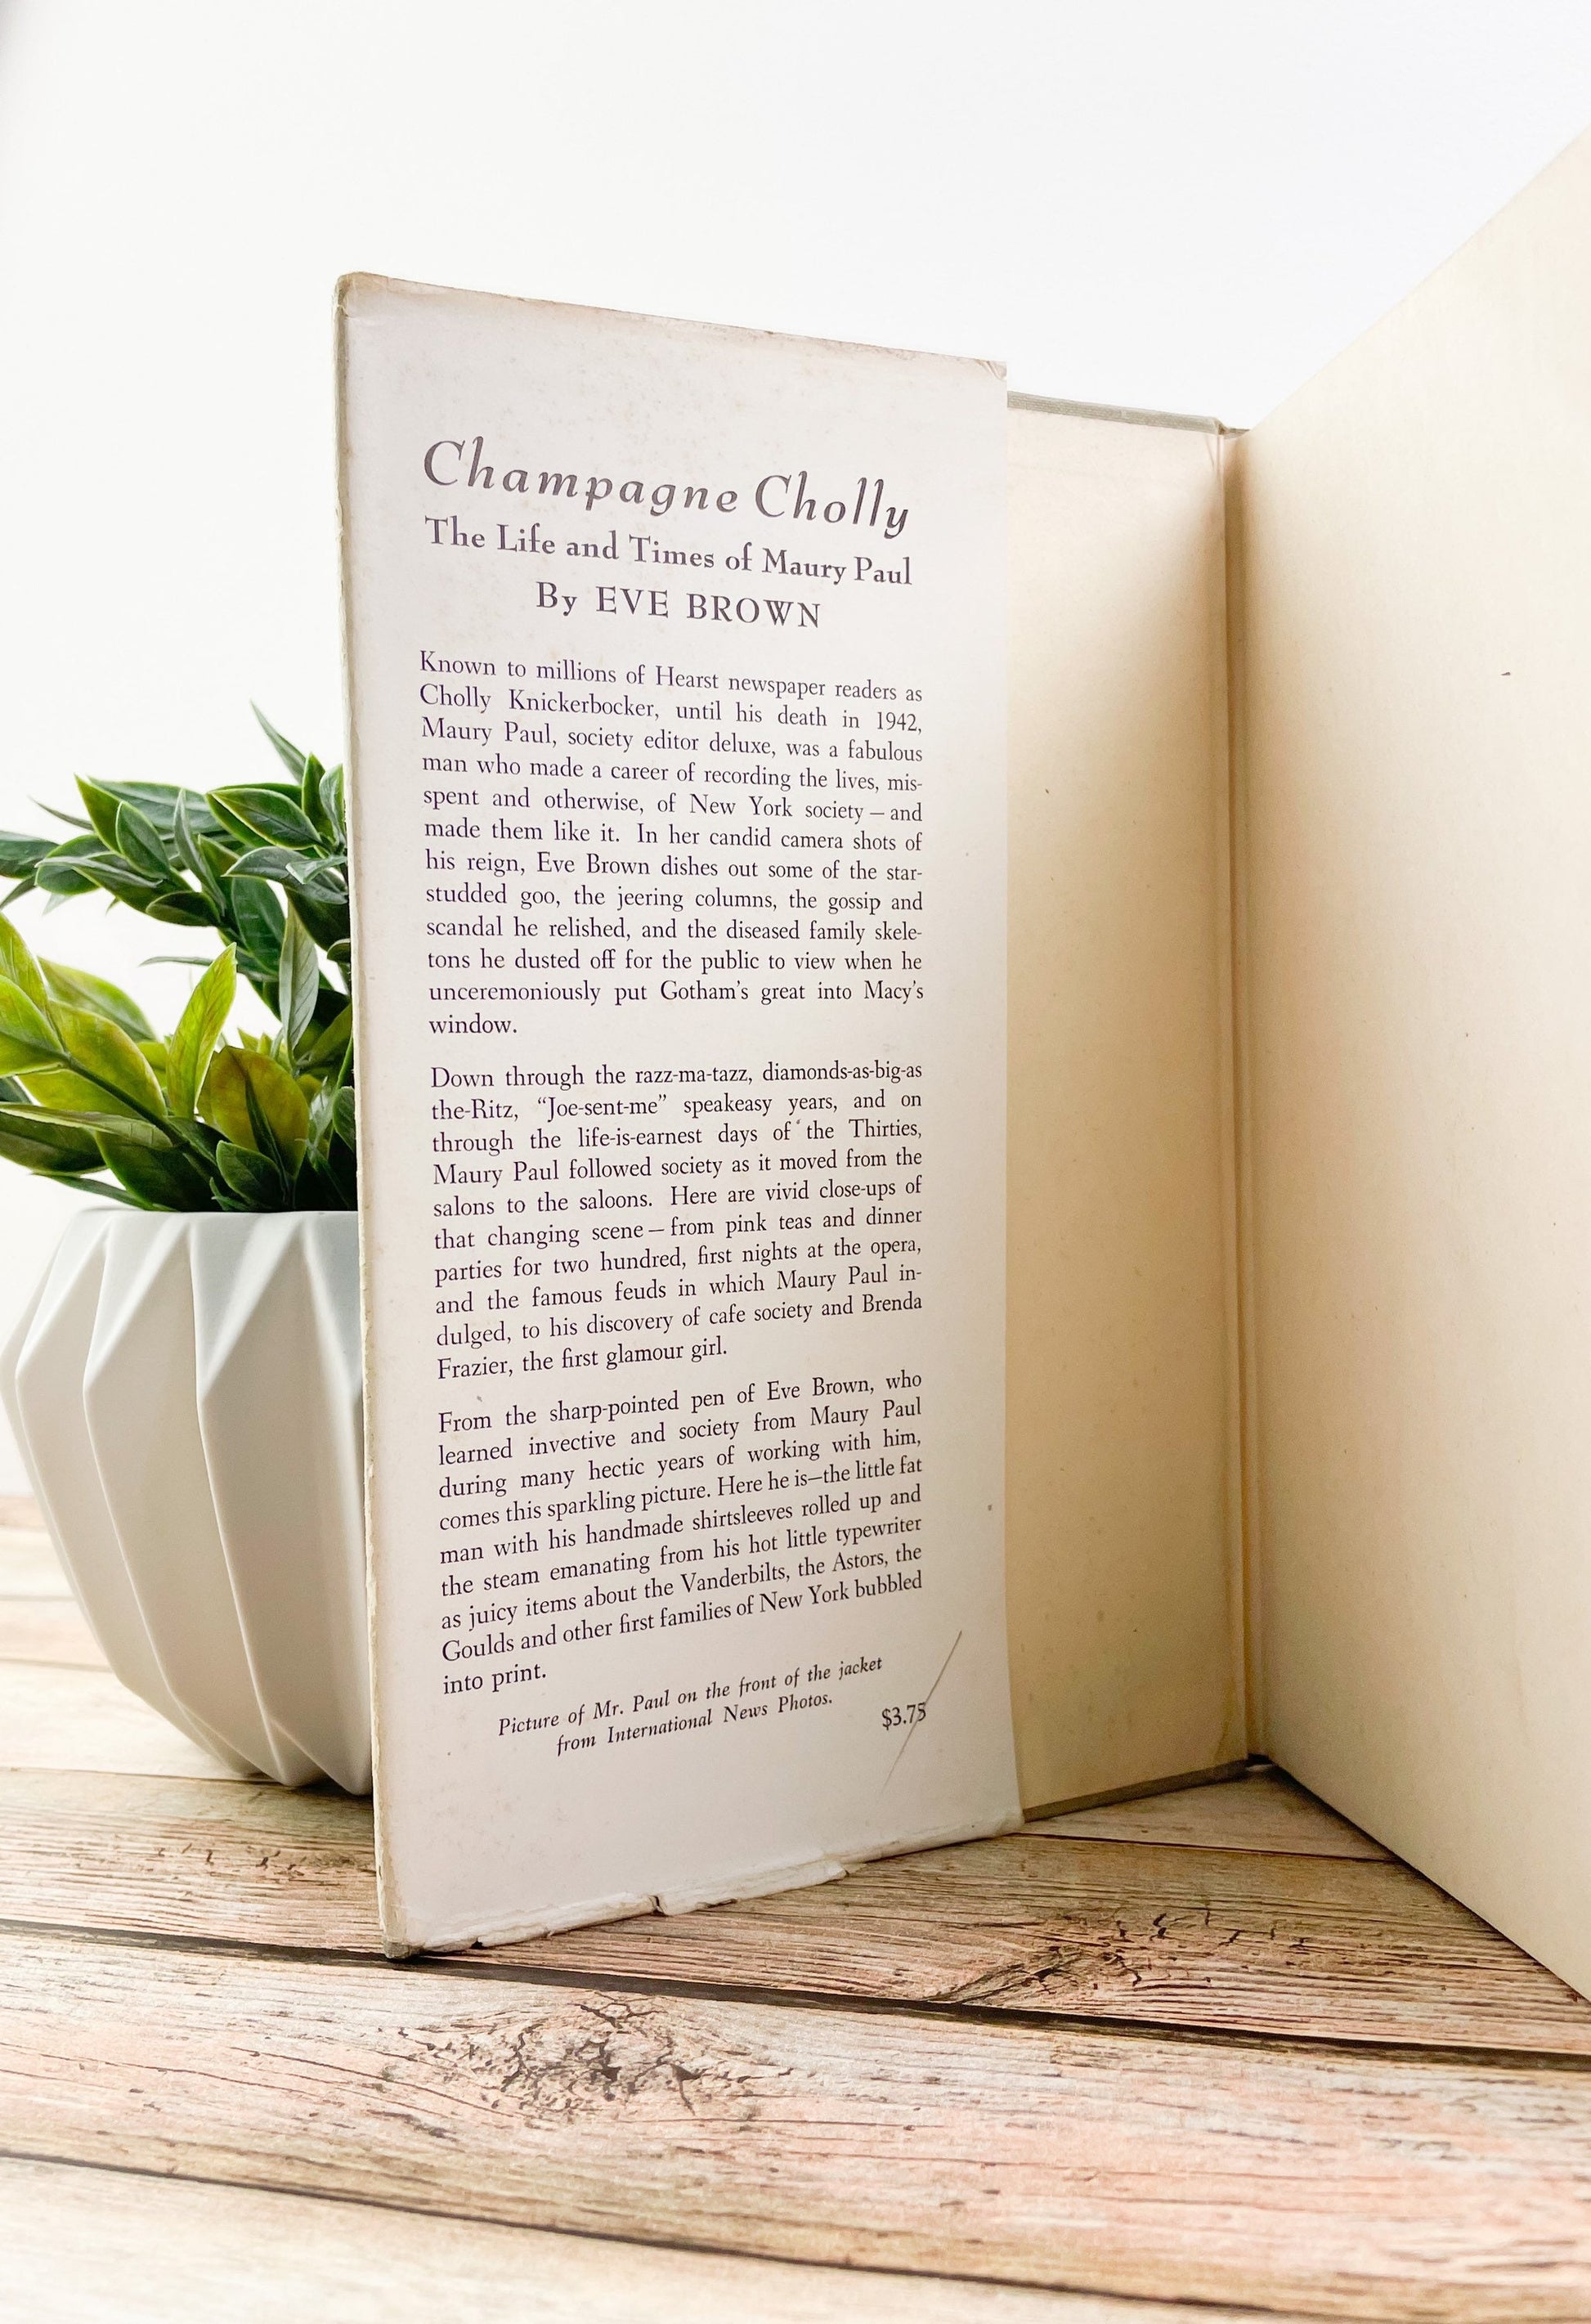 First Edition, Vintage Book, Champagne Cholly by Eve Brown